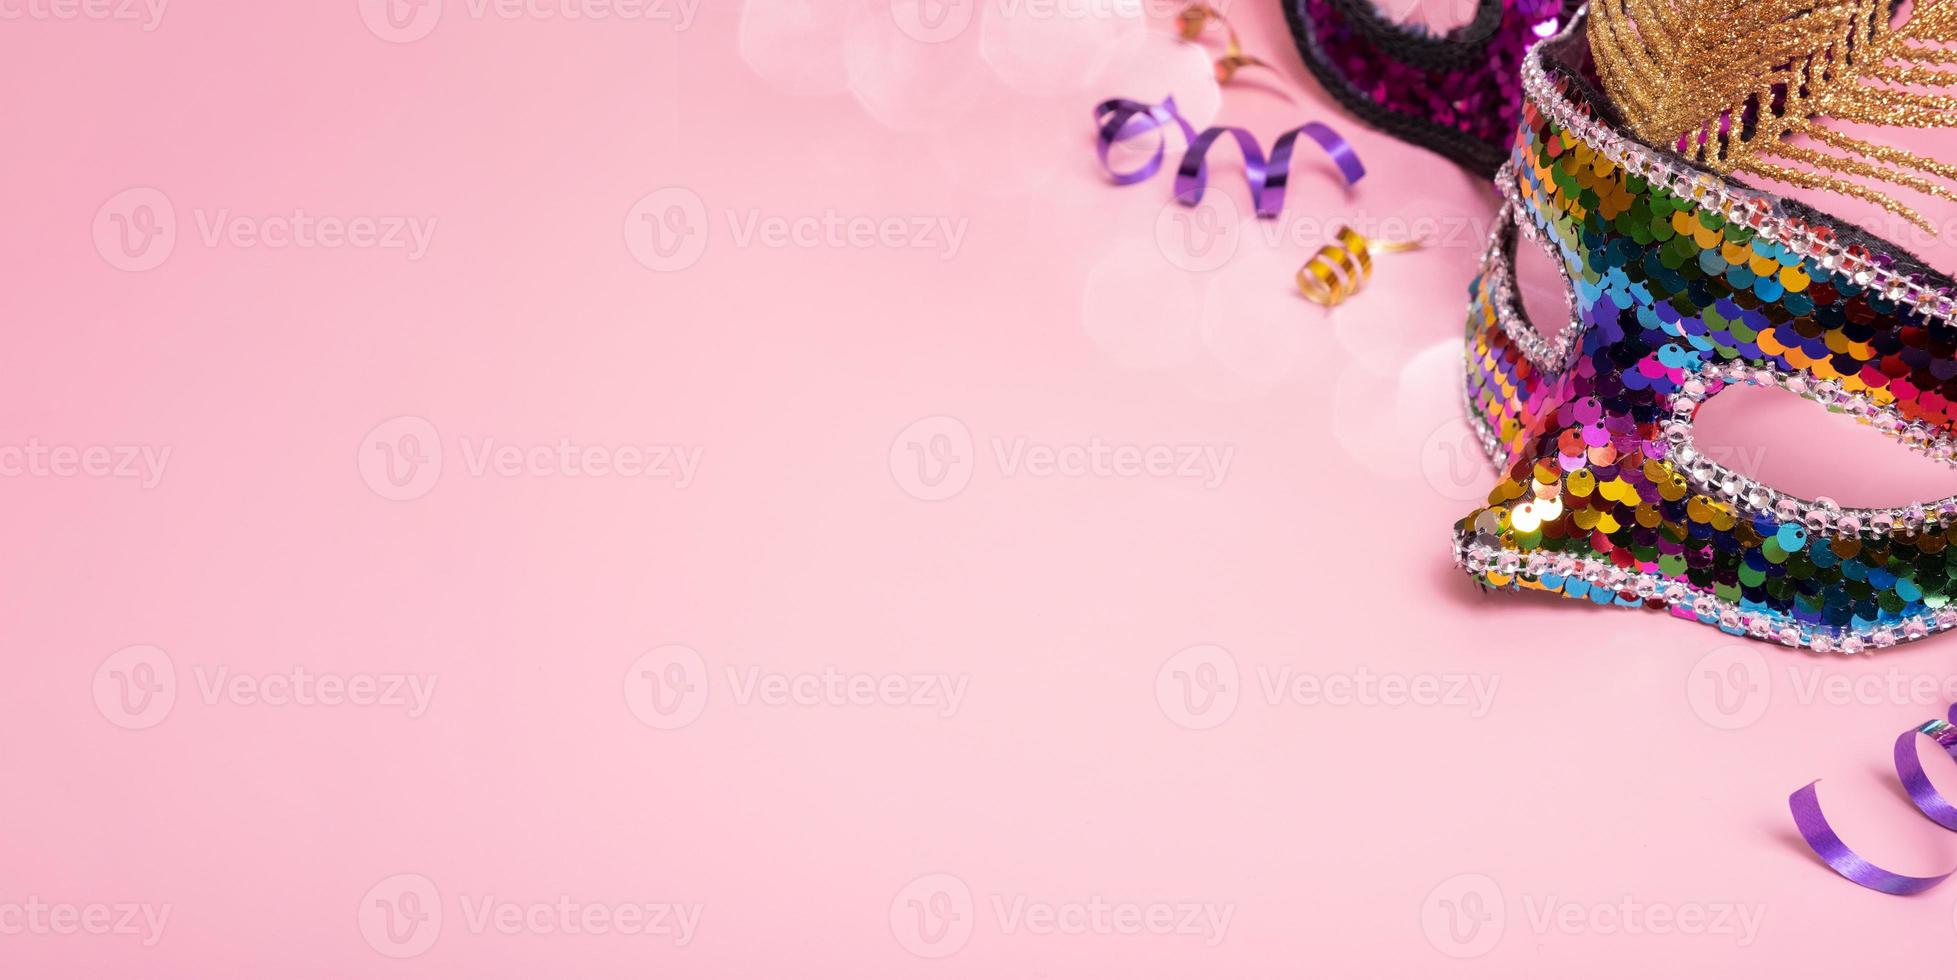 Banner with festive face mask for carnival celebration on colored background photo